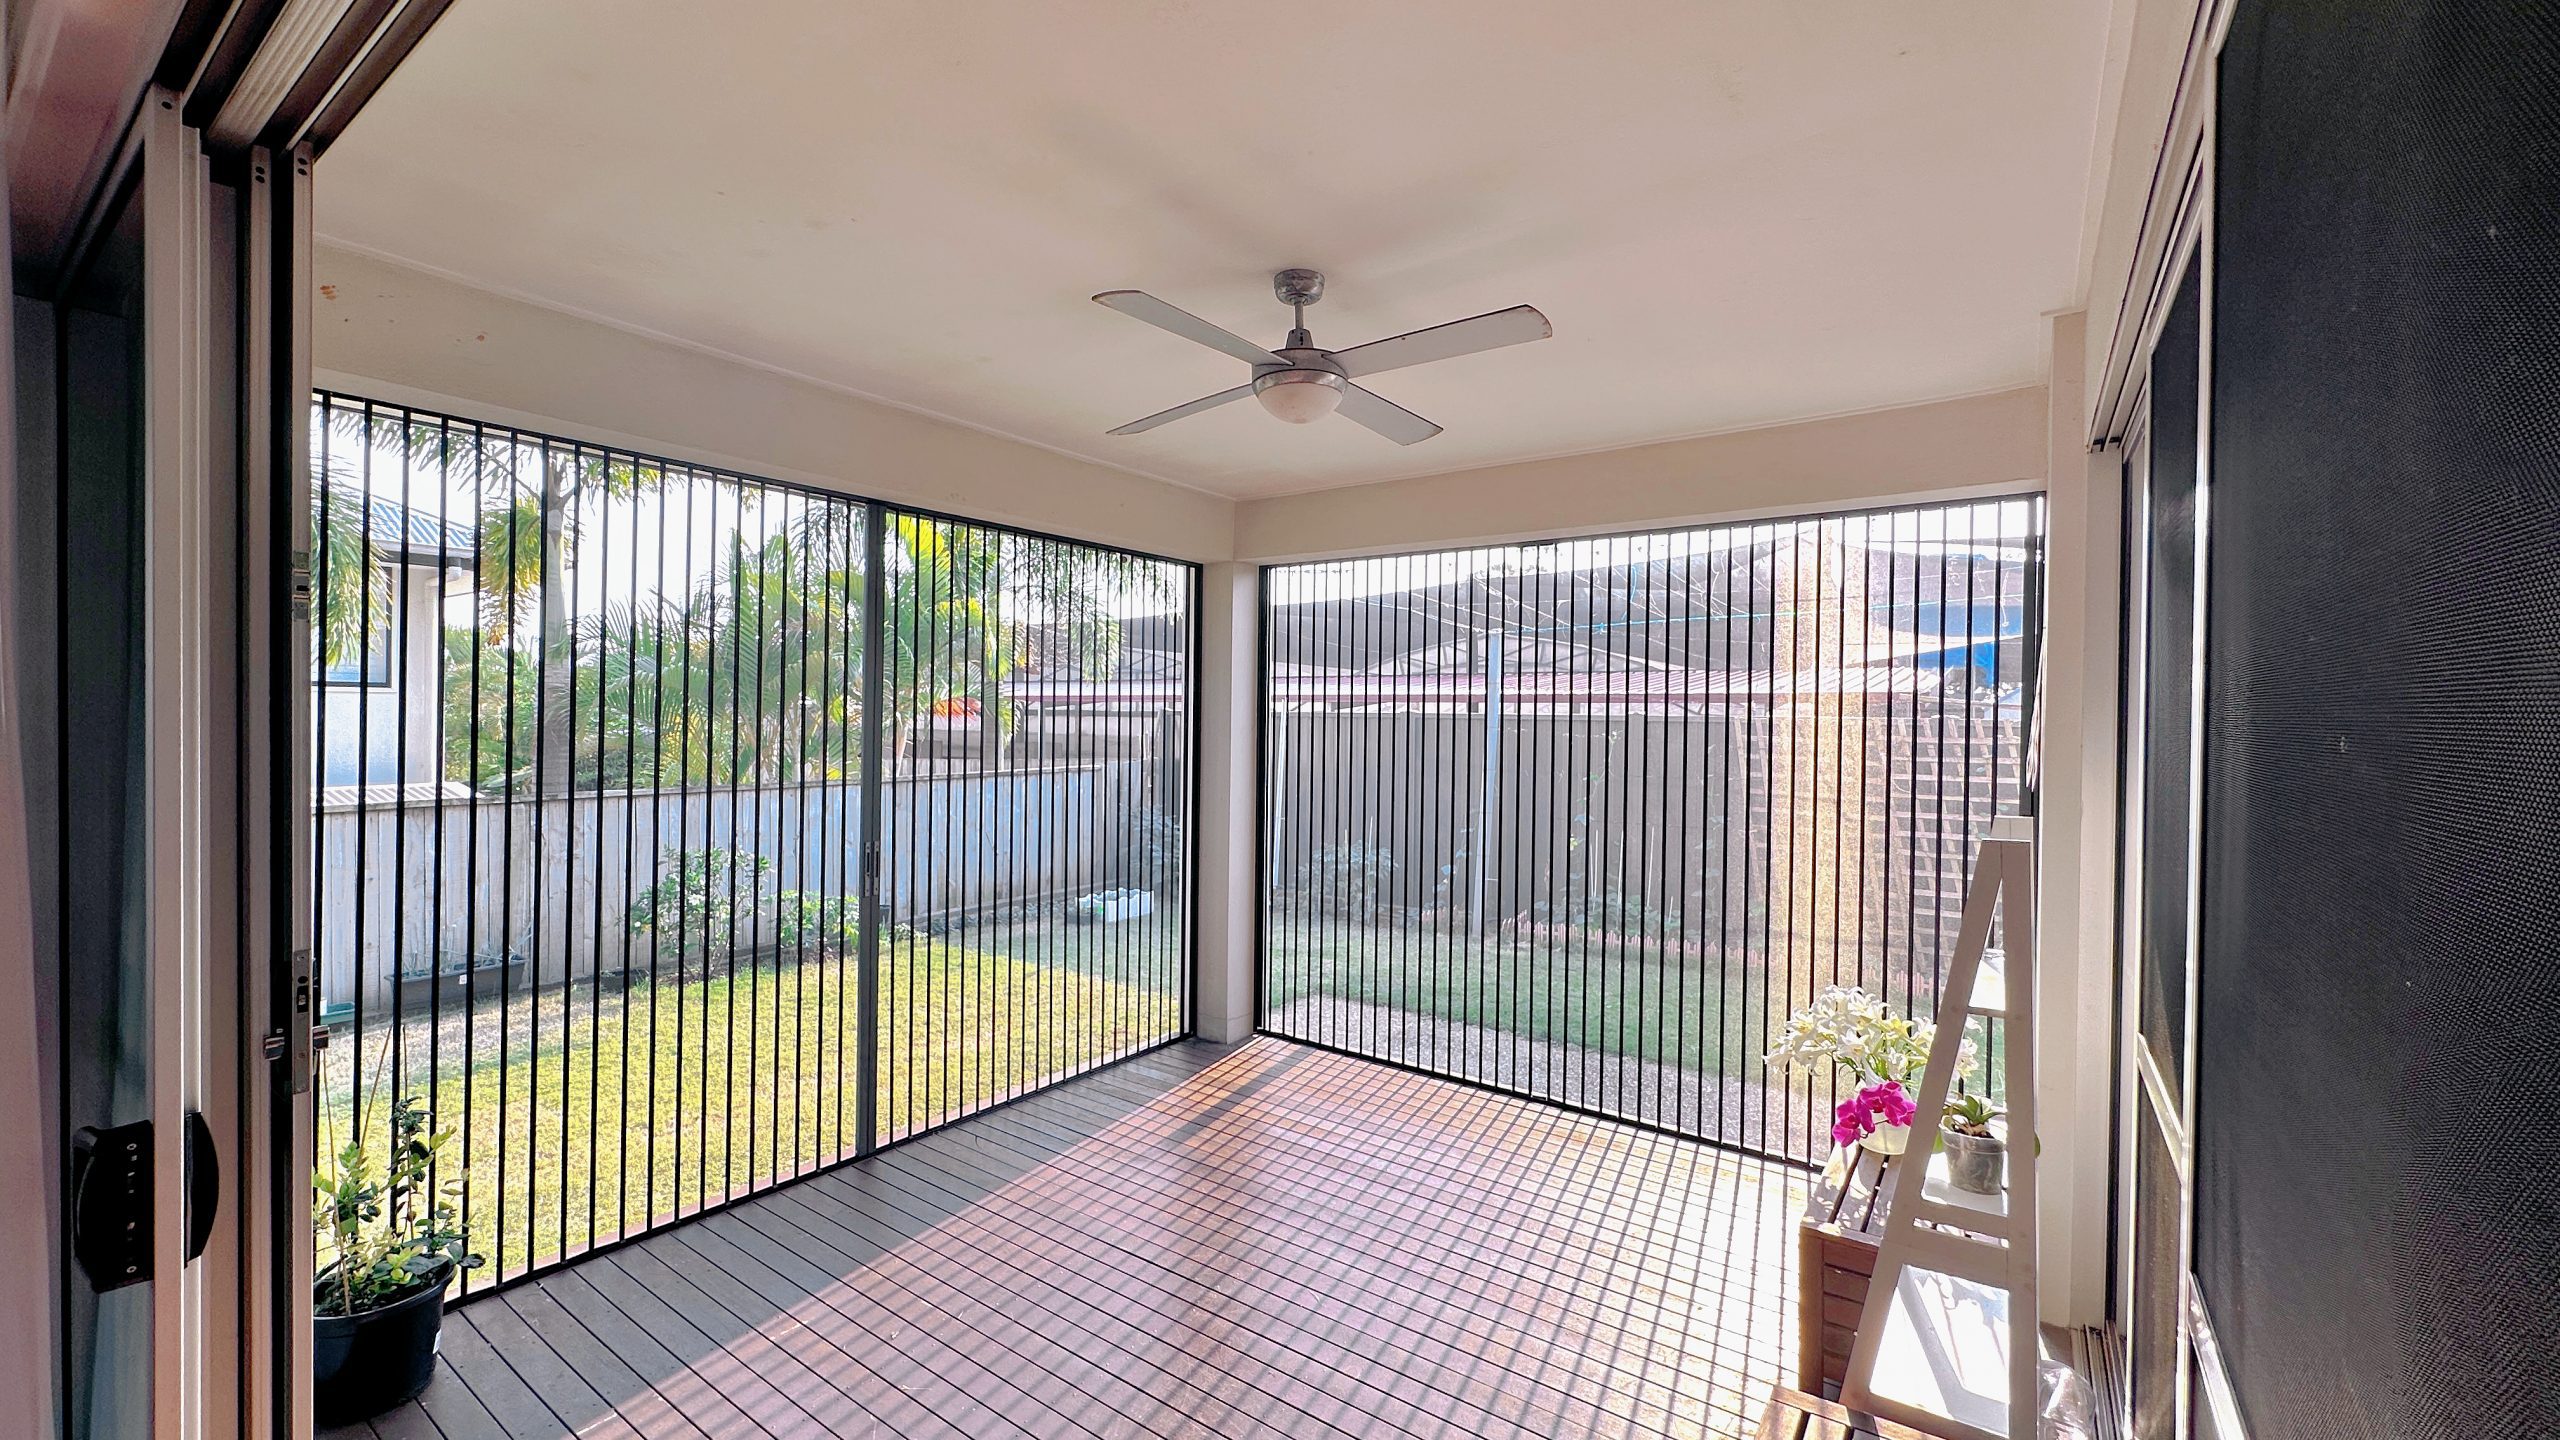 shut-it-solutions-blinds-awnings-shutters-brisbane-ipswich-toowoomba-sunshine-coast-gold-coast-tweed-heads-northern-rivers-retractable-flyscreens (1)